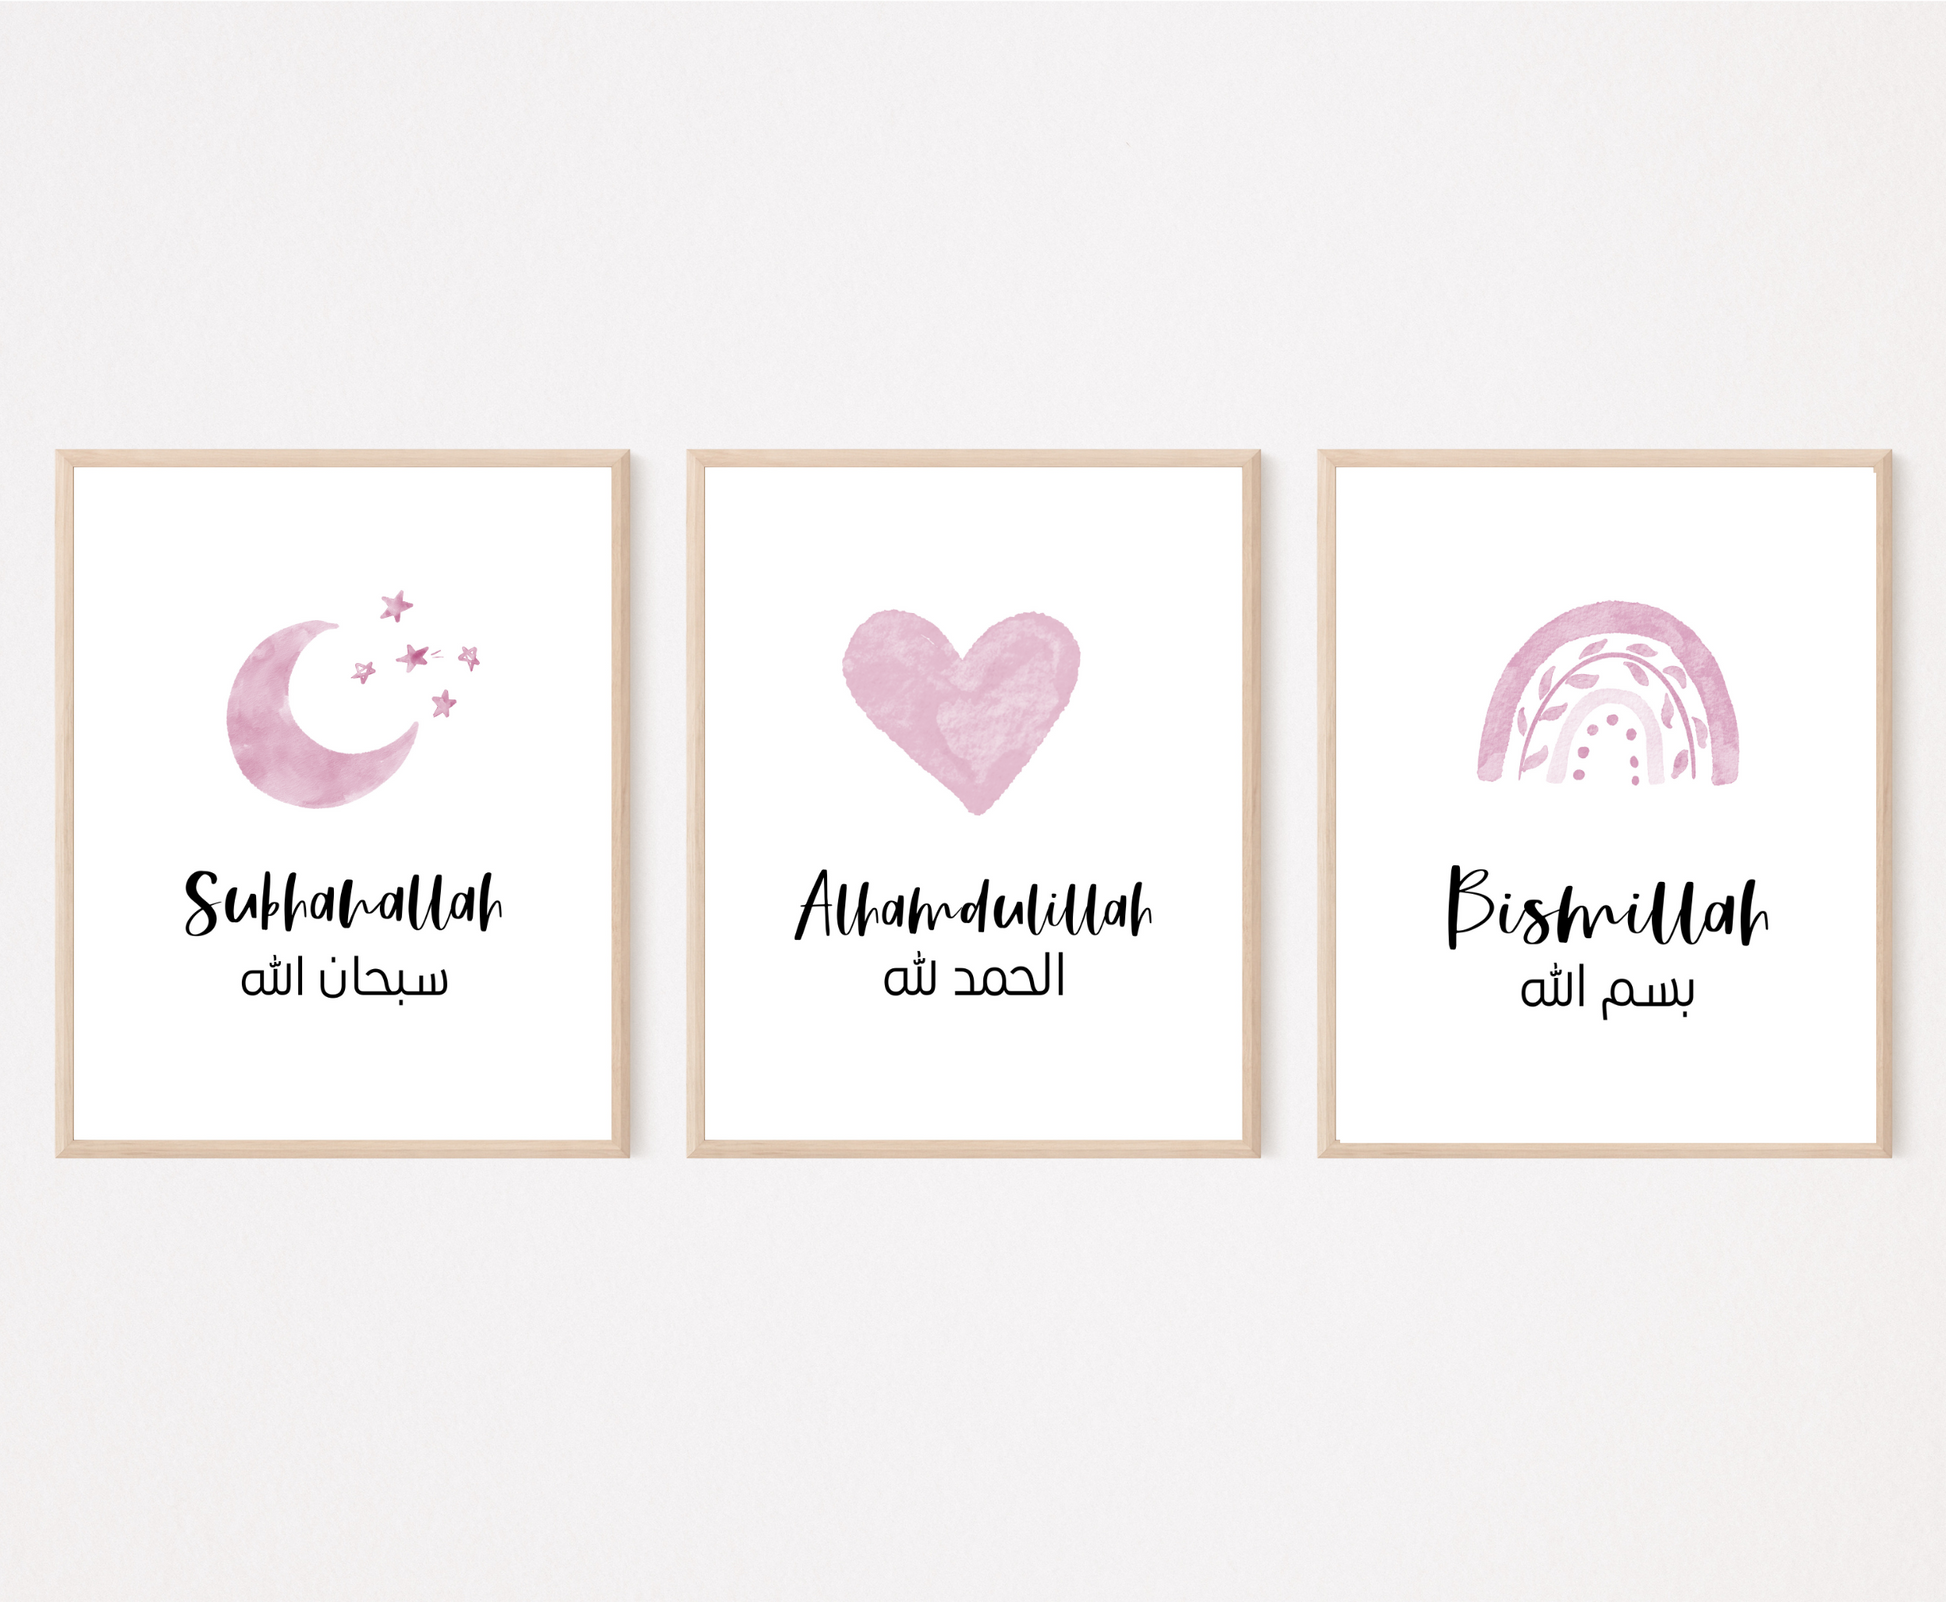 Three frames showing graphics for a baby girl’s room. The first one shows a small pink moon and three small stars with a piece of writing below that says: “Subhanallah”. The middle graphic shows a pink heart with a piece of writing below that says: “Alhamdulillah”. The last one shows a pink rainbow with a piece of writing below that says: “Bismillah”.